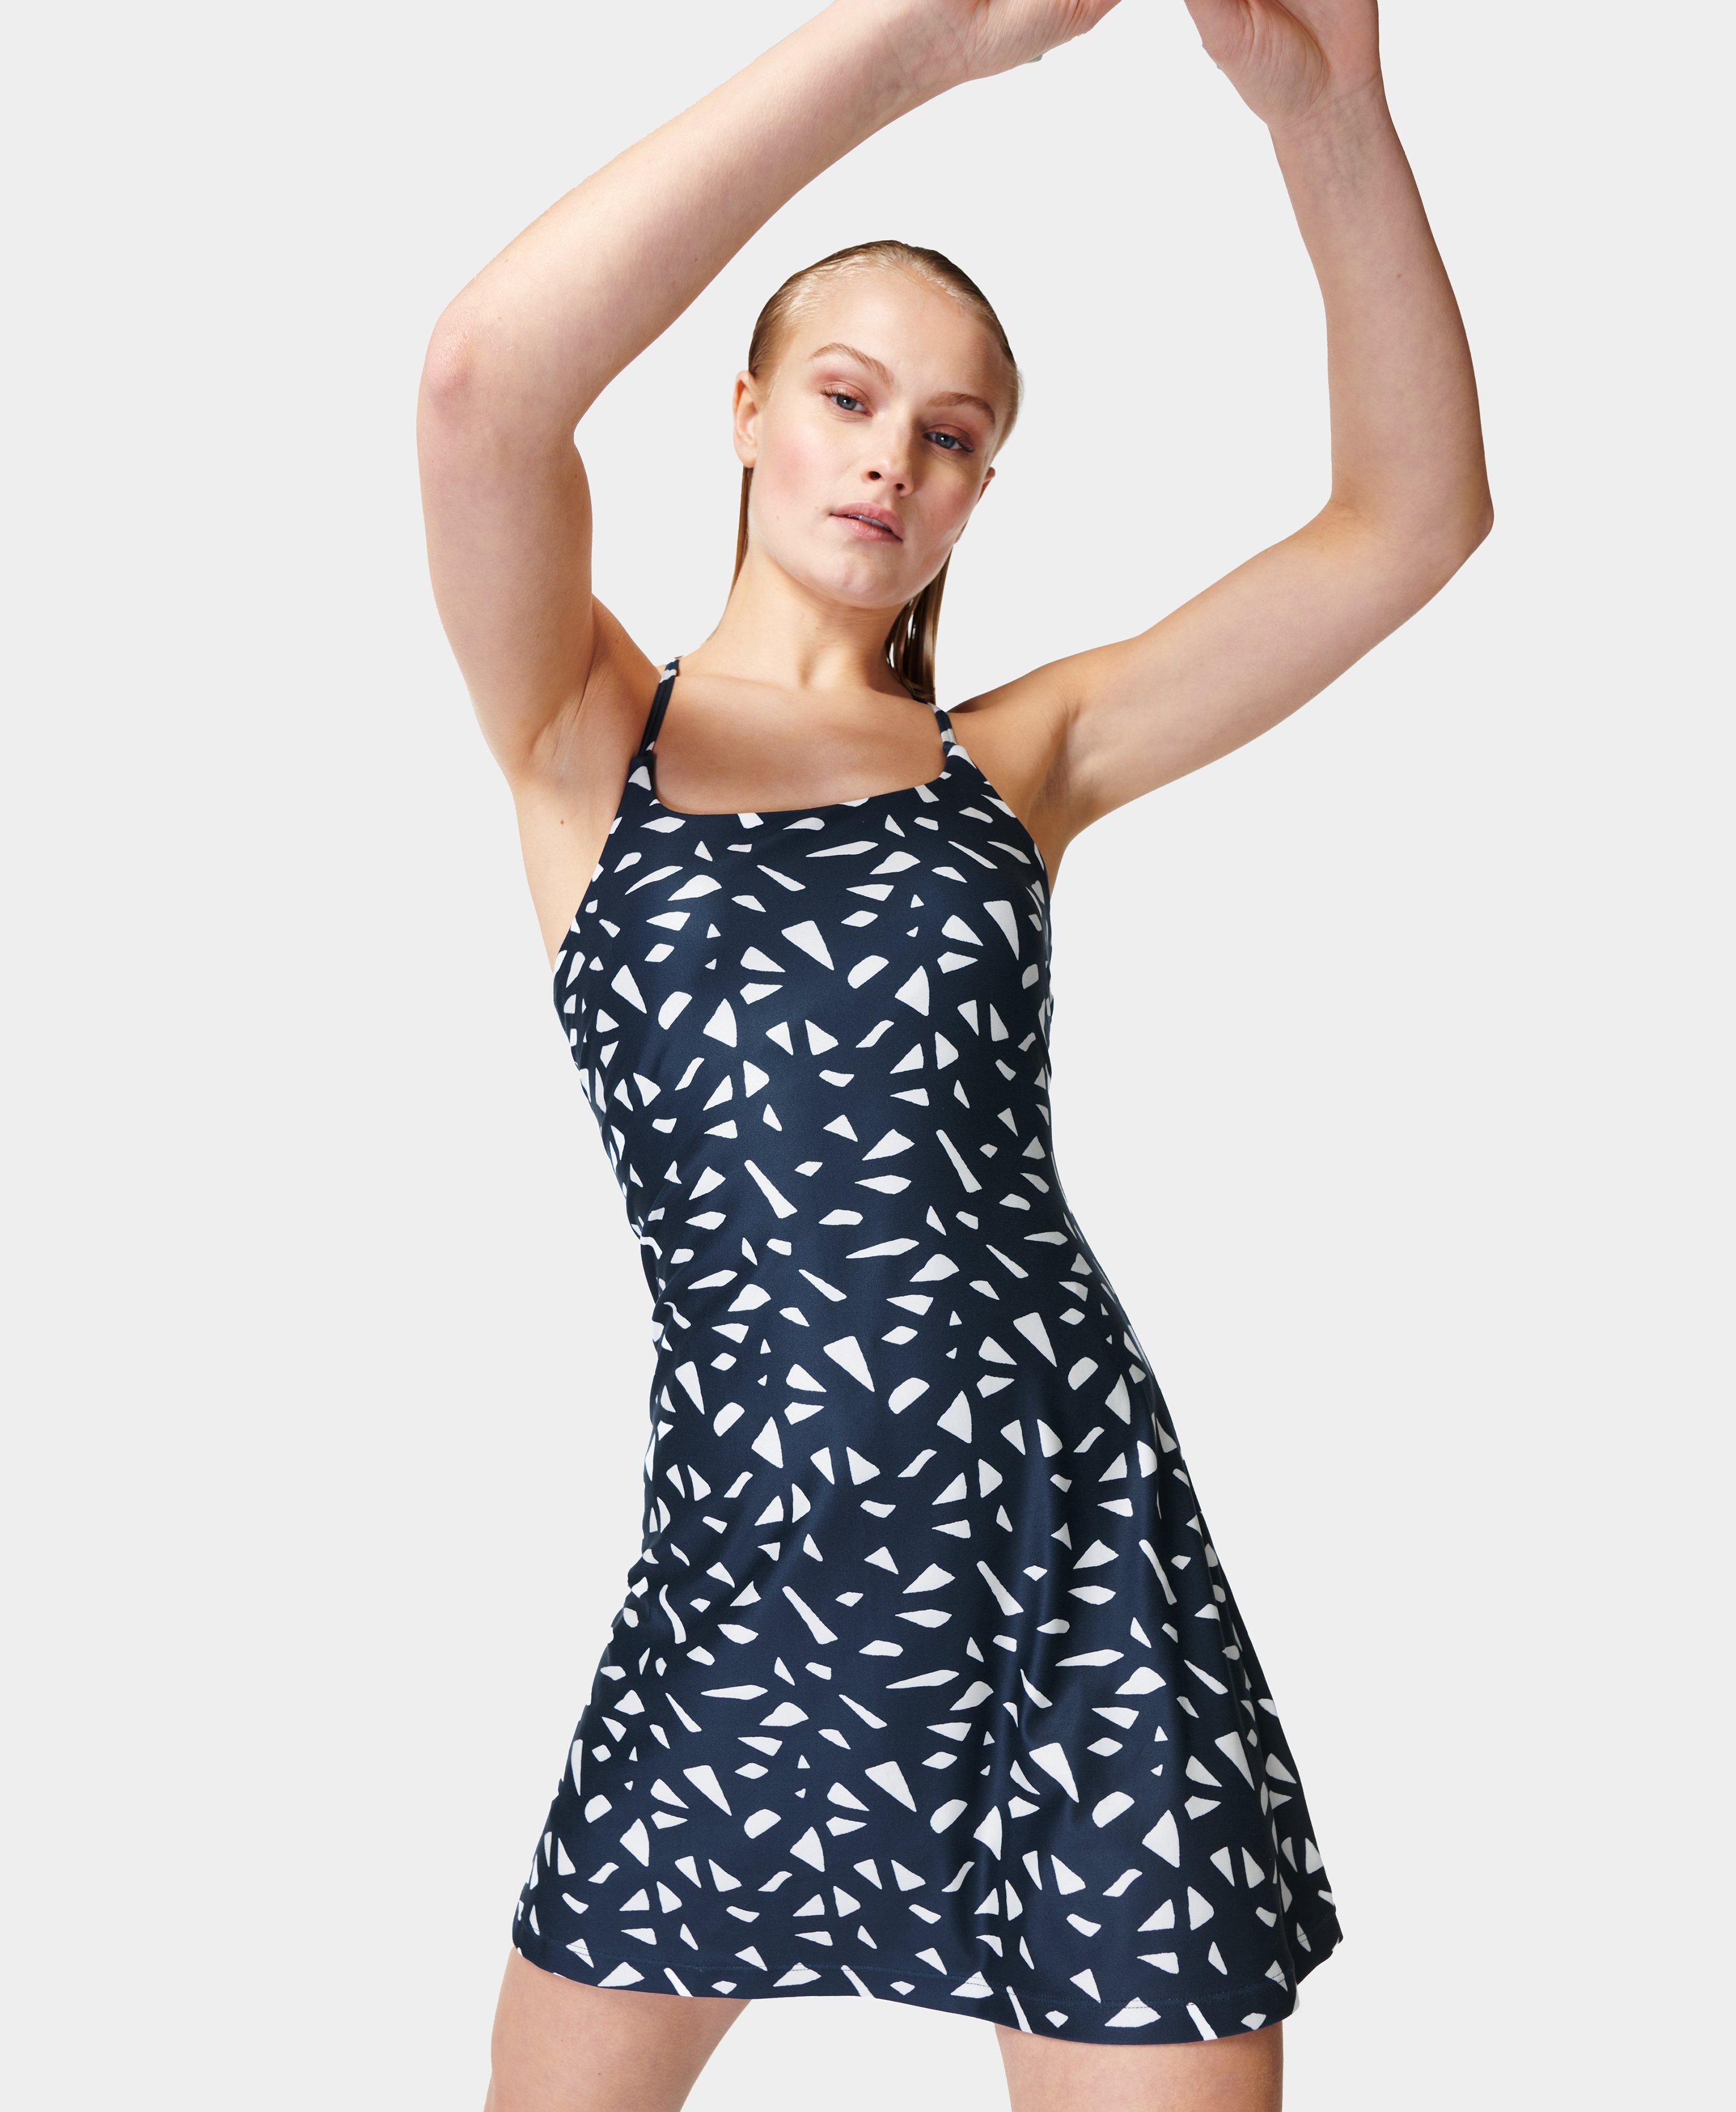 All Round Workout Dress - Navy Blue Mini Vintage Seed Print